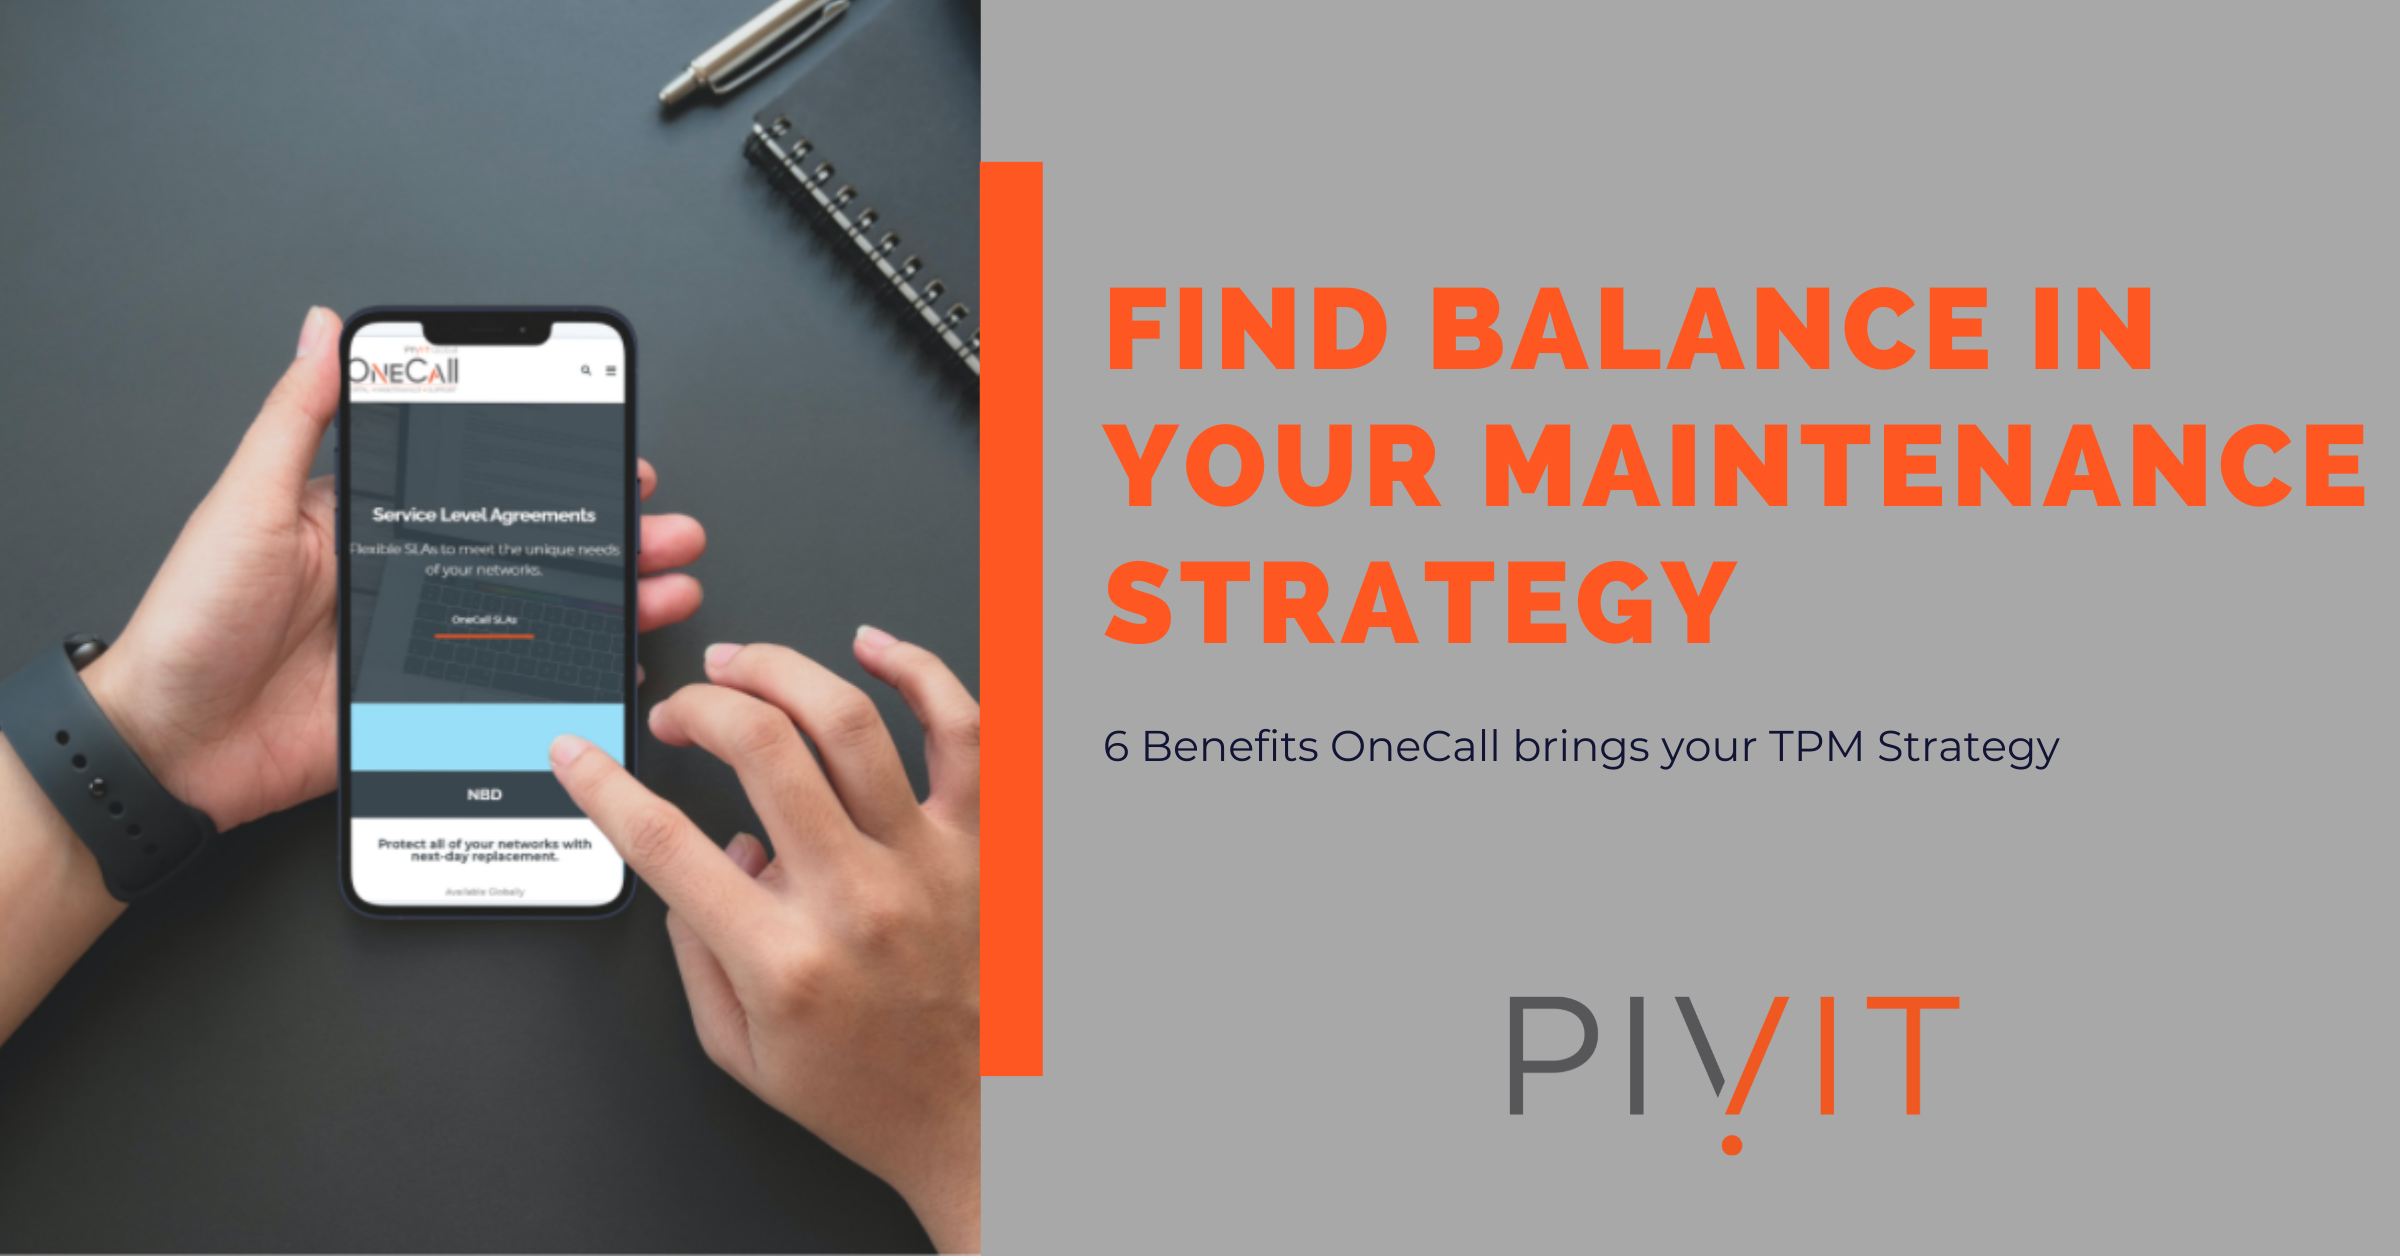 6 Benefits OneCall brings your TPM Strategy